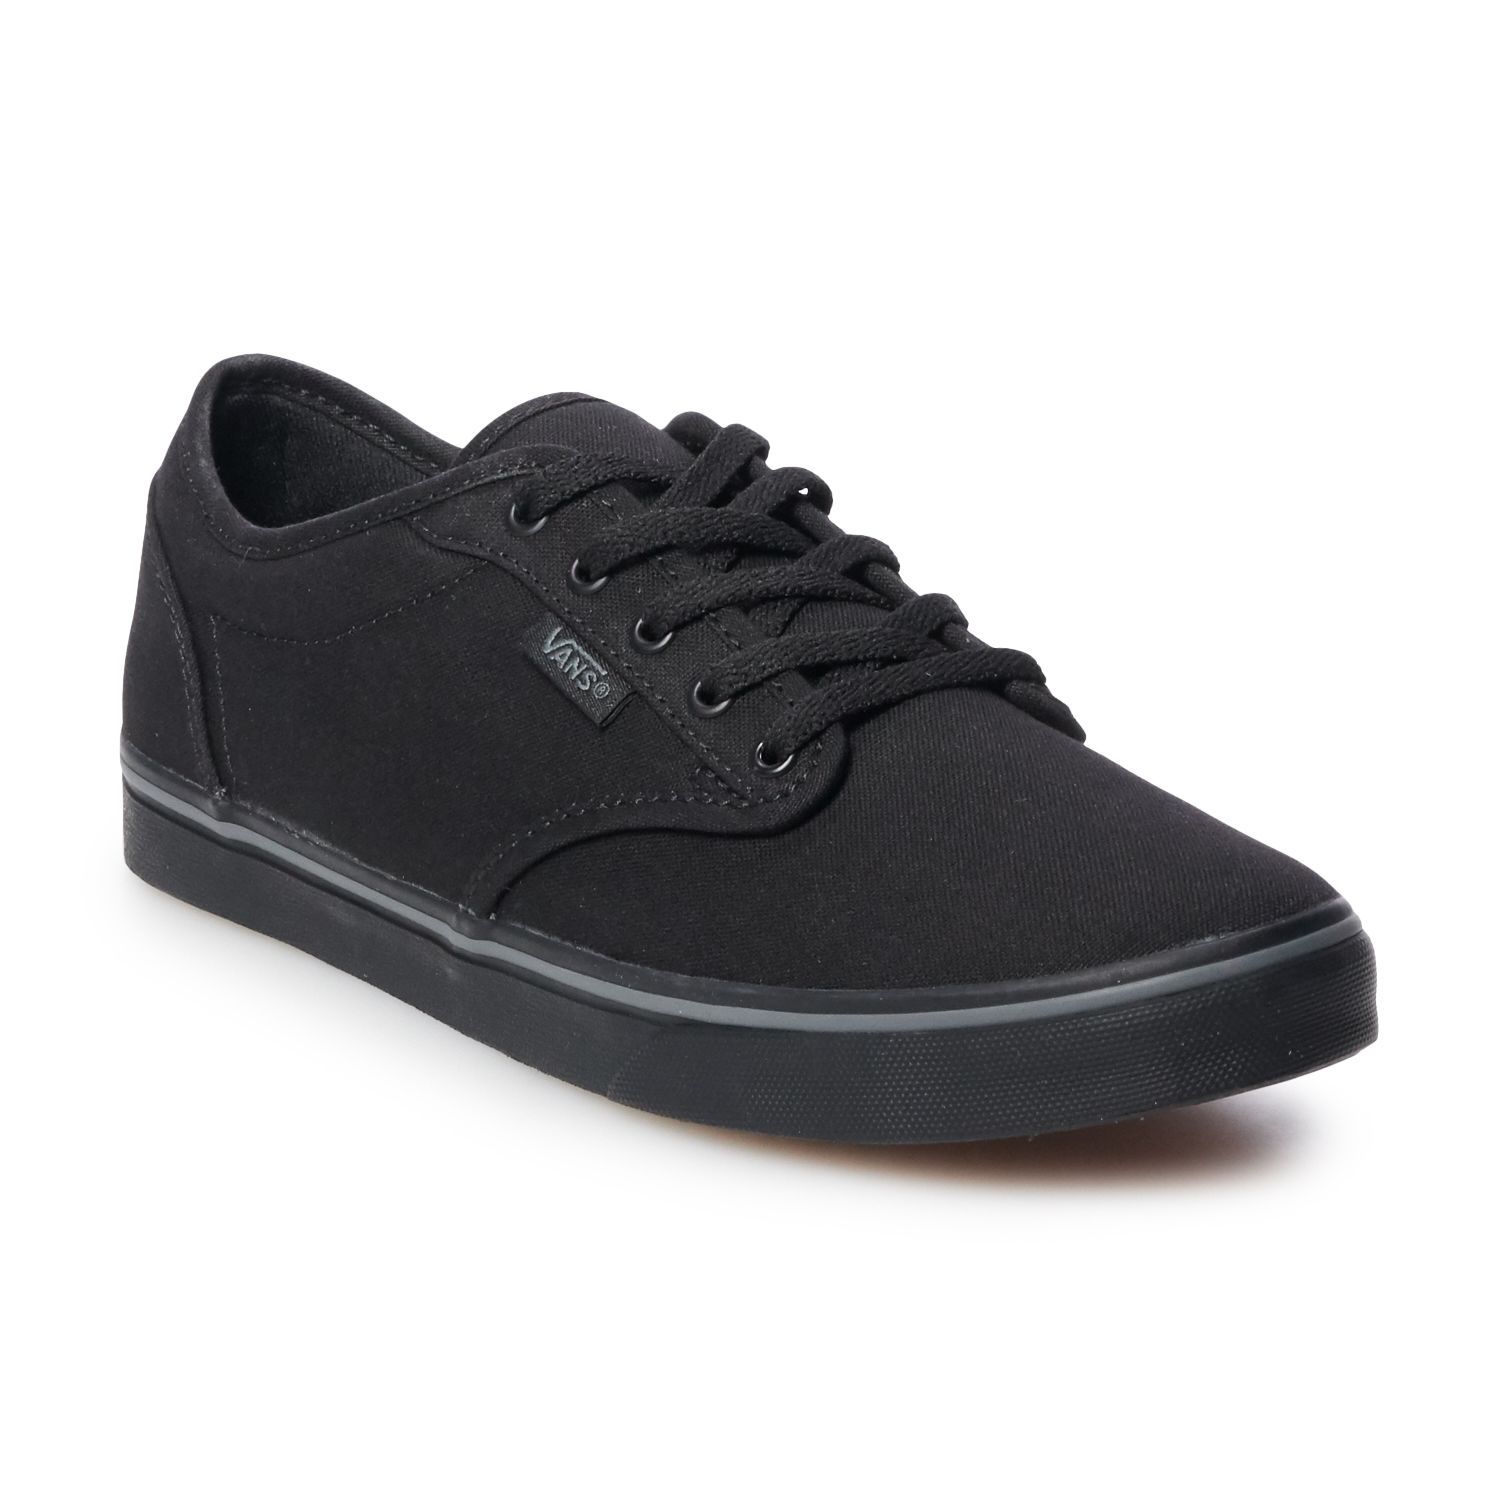 Vans® Atwood Low Women's Skate Shoes